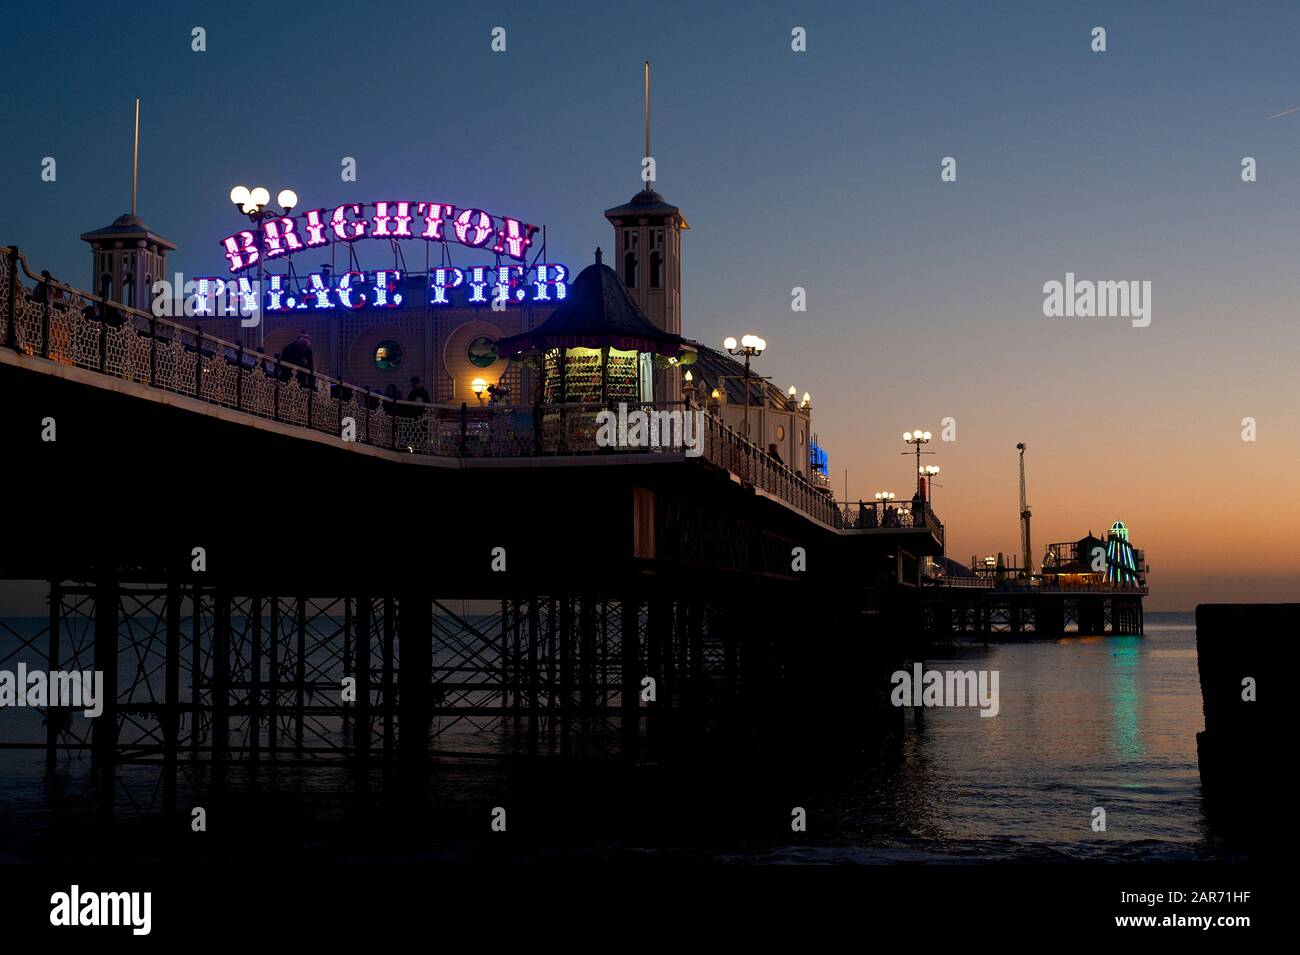 Brighton Palace Pier with its illuminated sign lit up at dusk. The famous pier is one of the U.K.'s most visited tourist sights. Stock Photo